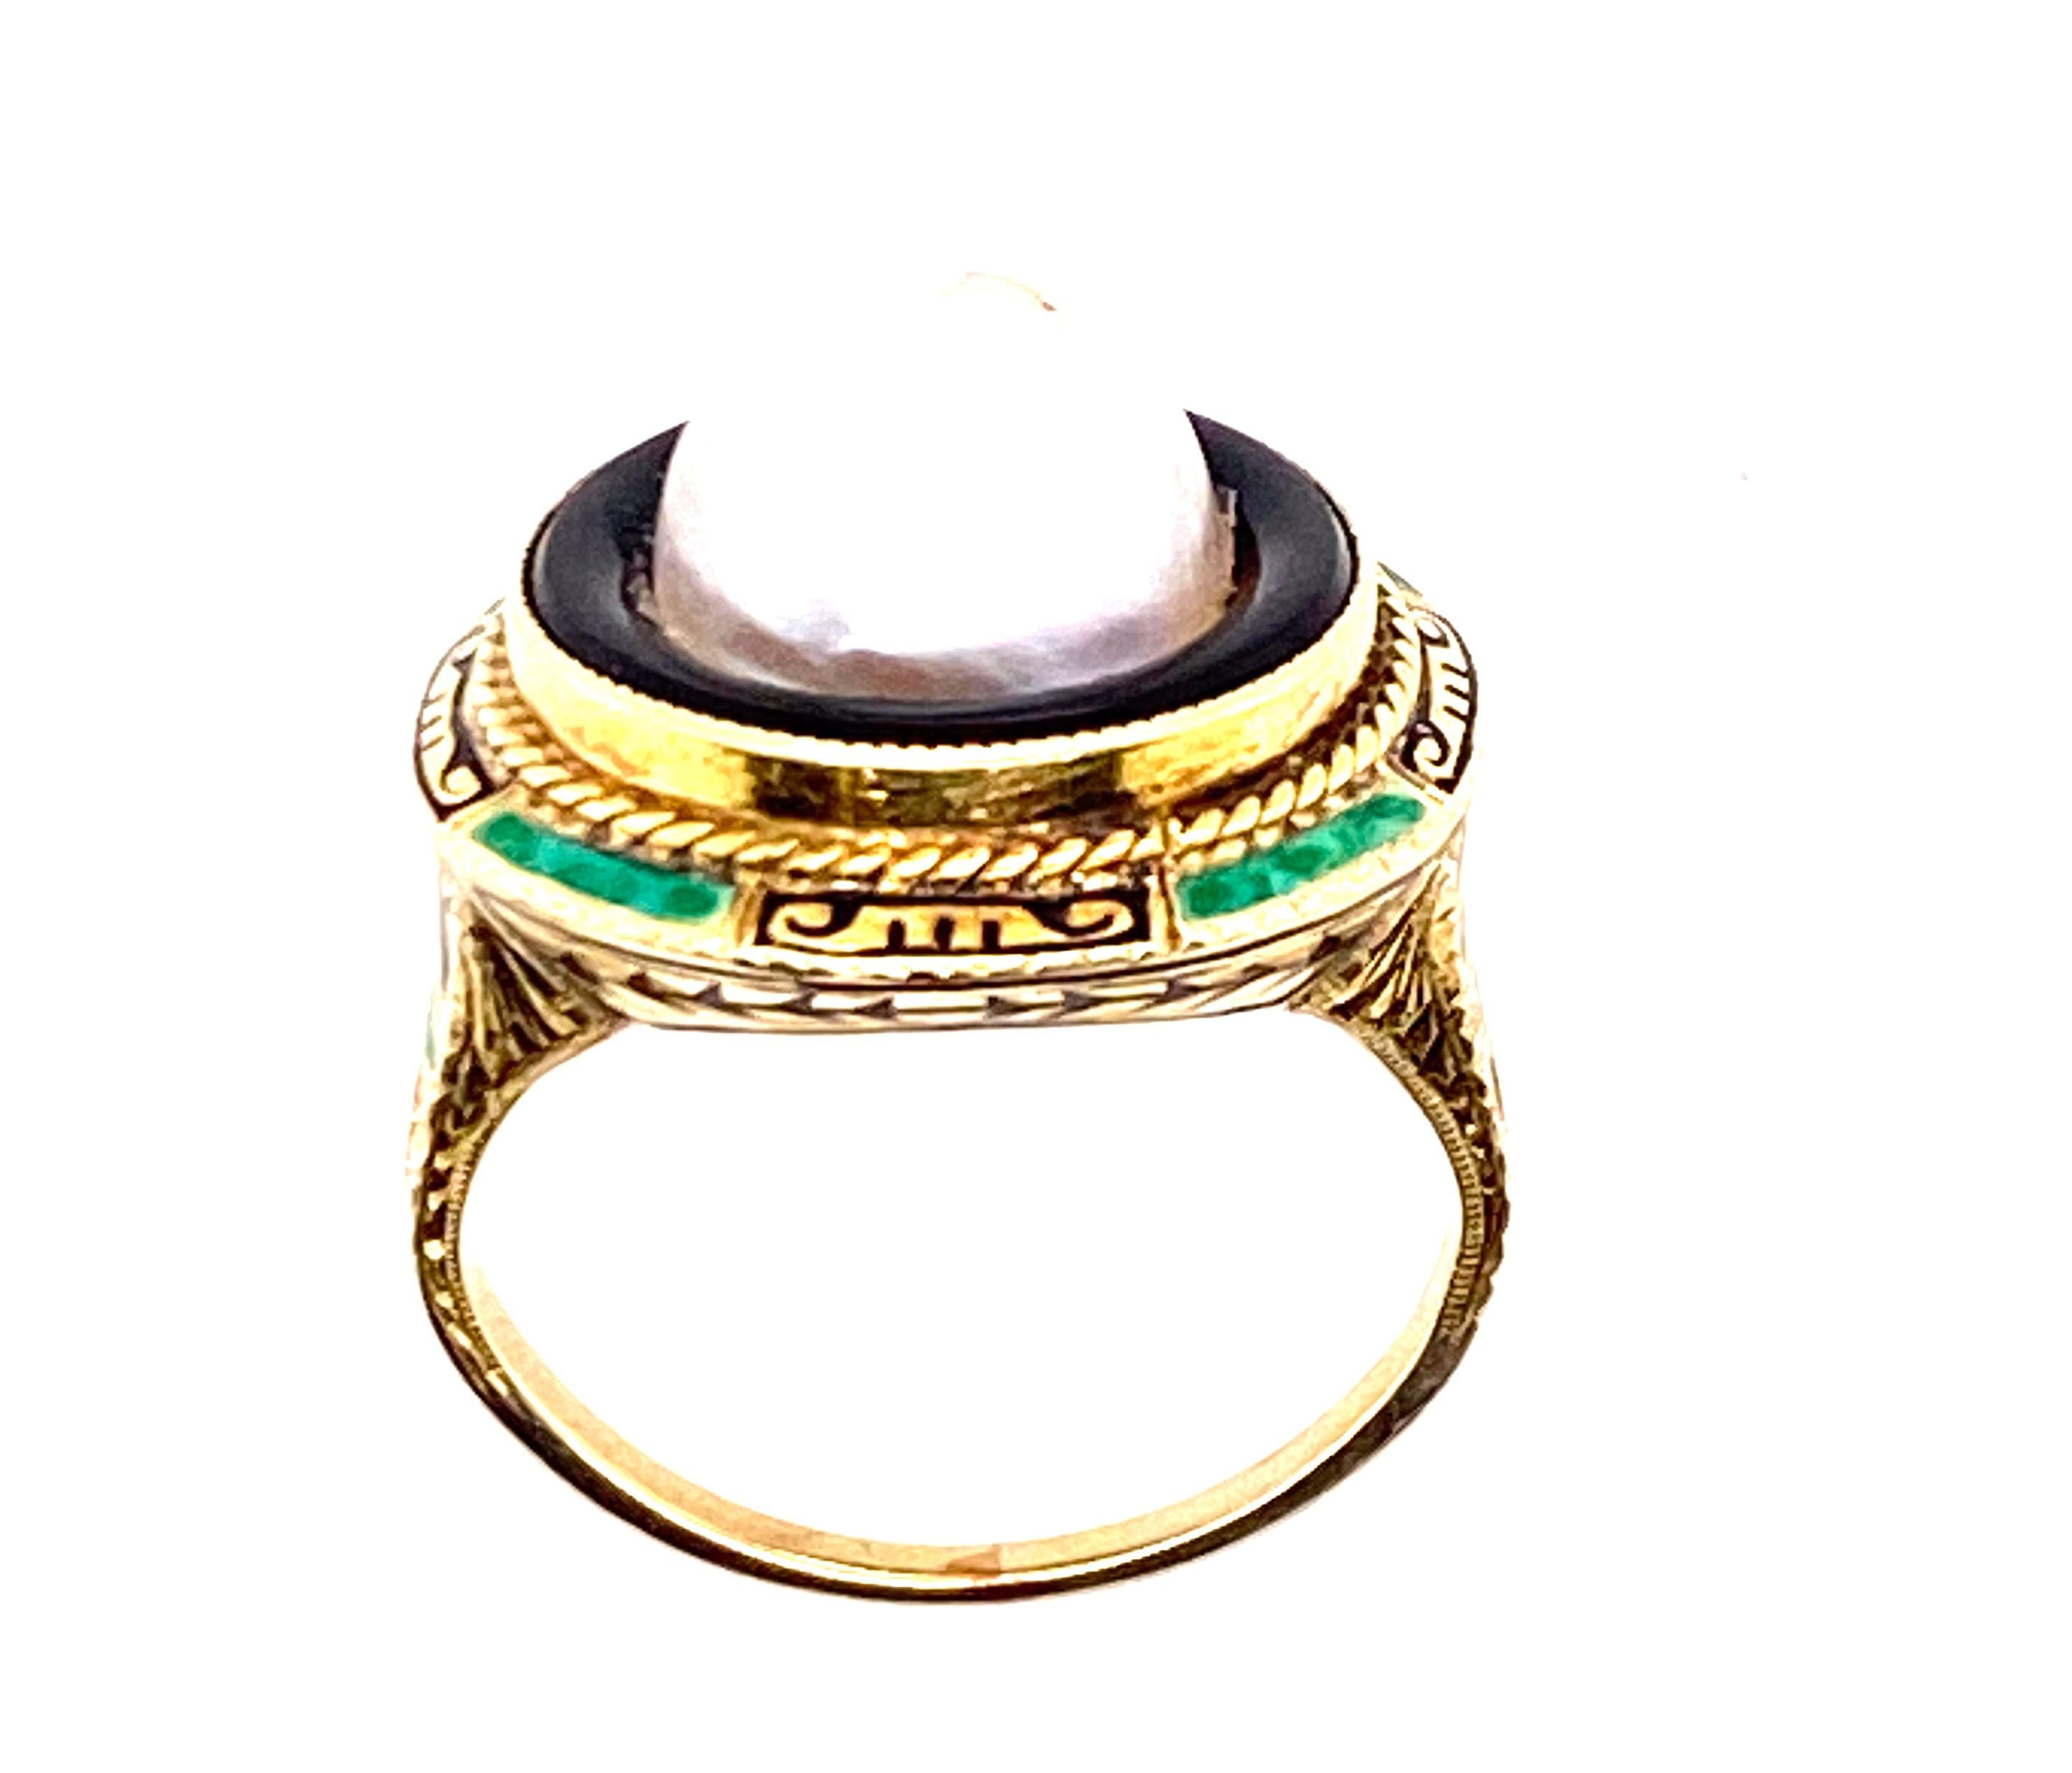 Genuine Original Art Deco Antique from 1920's Pearl Enamel 14K Yellow Gold Cocktail Ring


Features a 9mm Natural Round Pearl Center

Hand Painted Enamel In Outstanding Condition

Pearl is Encircled by an Onyx Gemstone

Hand Carved